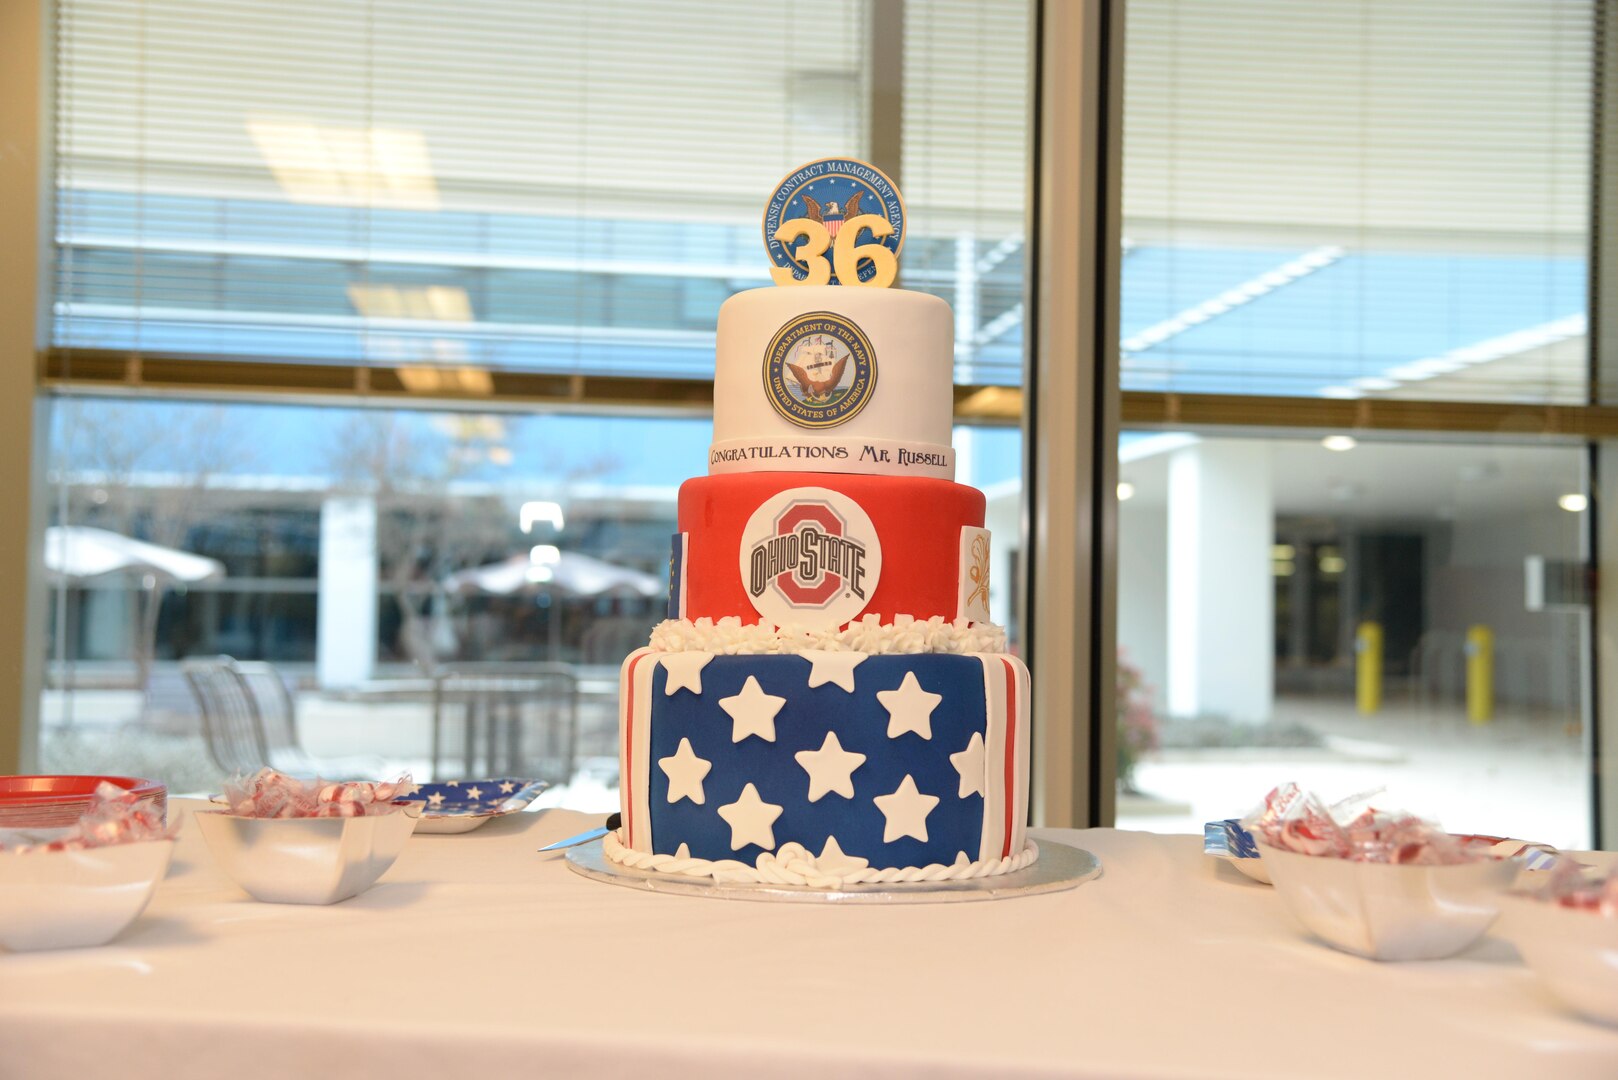 A cake awaits those gathered to celebrate Jim Russell retirement at a Dec. 19 ceremony at Fort Lee, Virginia. Russell retired as deputy director of the Defense Contract Management Agency after 36 years of federal service. (DCMA photo by Stephen Hickok)